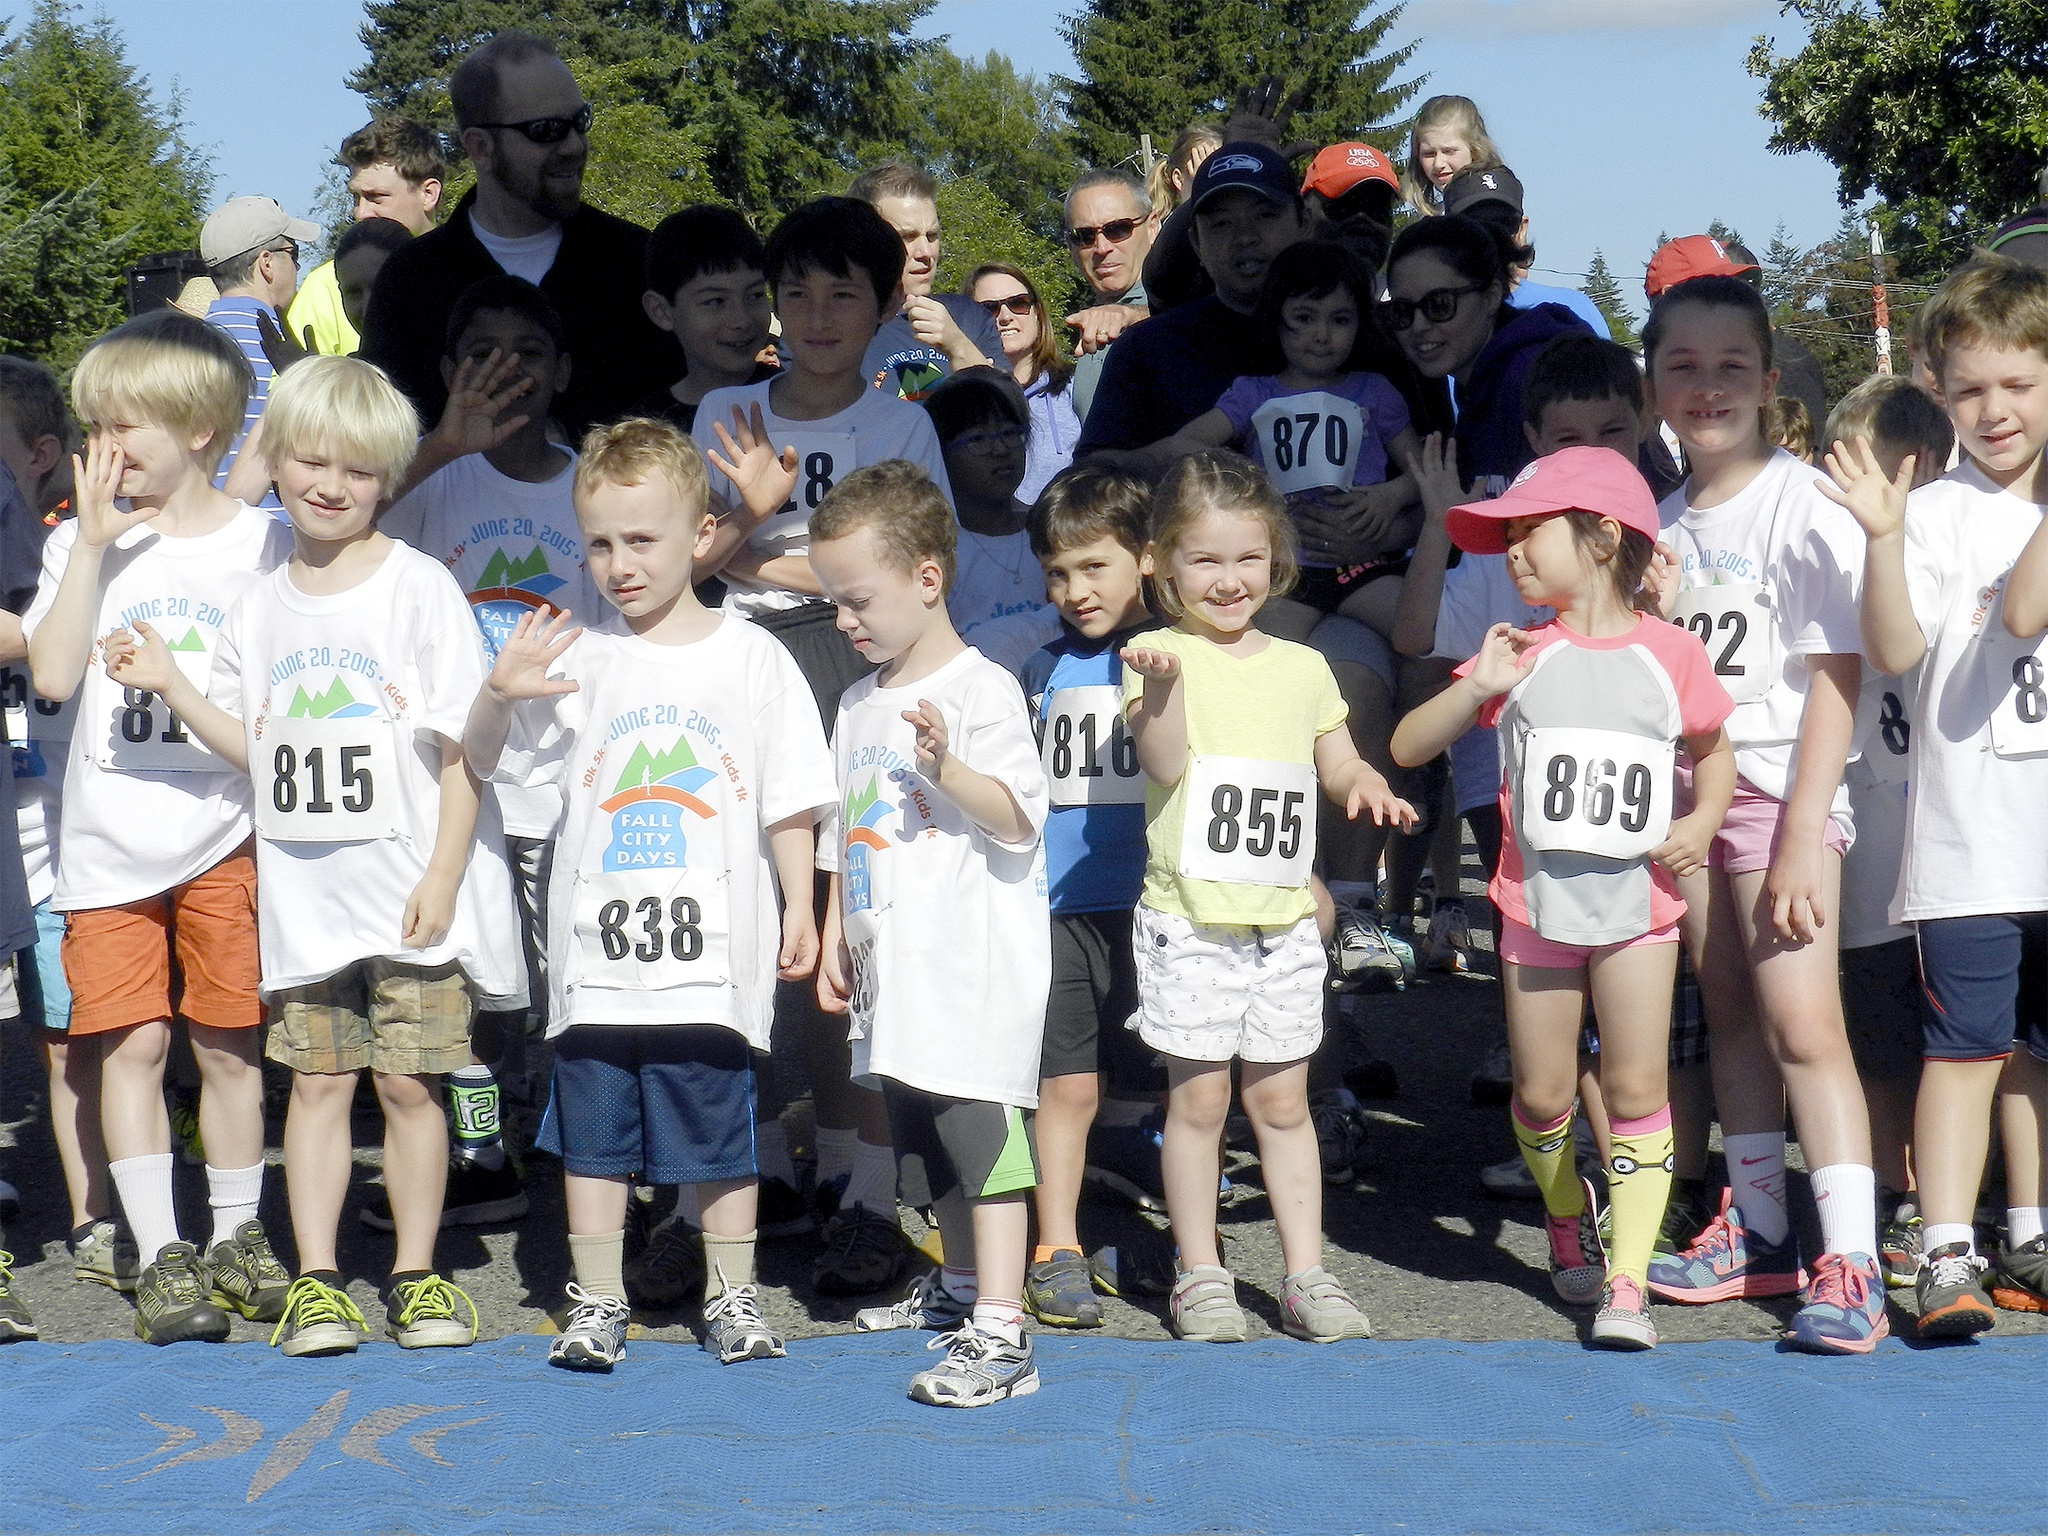 William Shaw/Staff PhotoYoungsters line up for the 2015 Fall City Days 1K. This year’s race starts at 9 a.m.